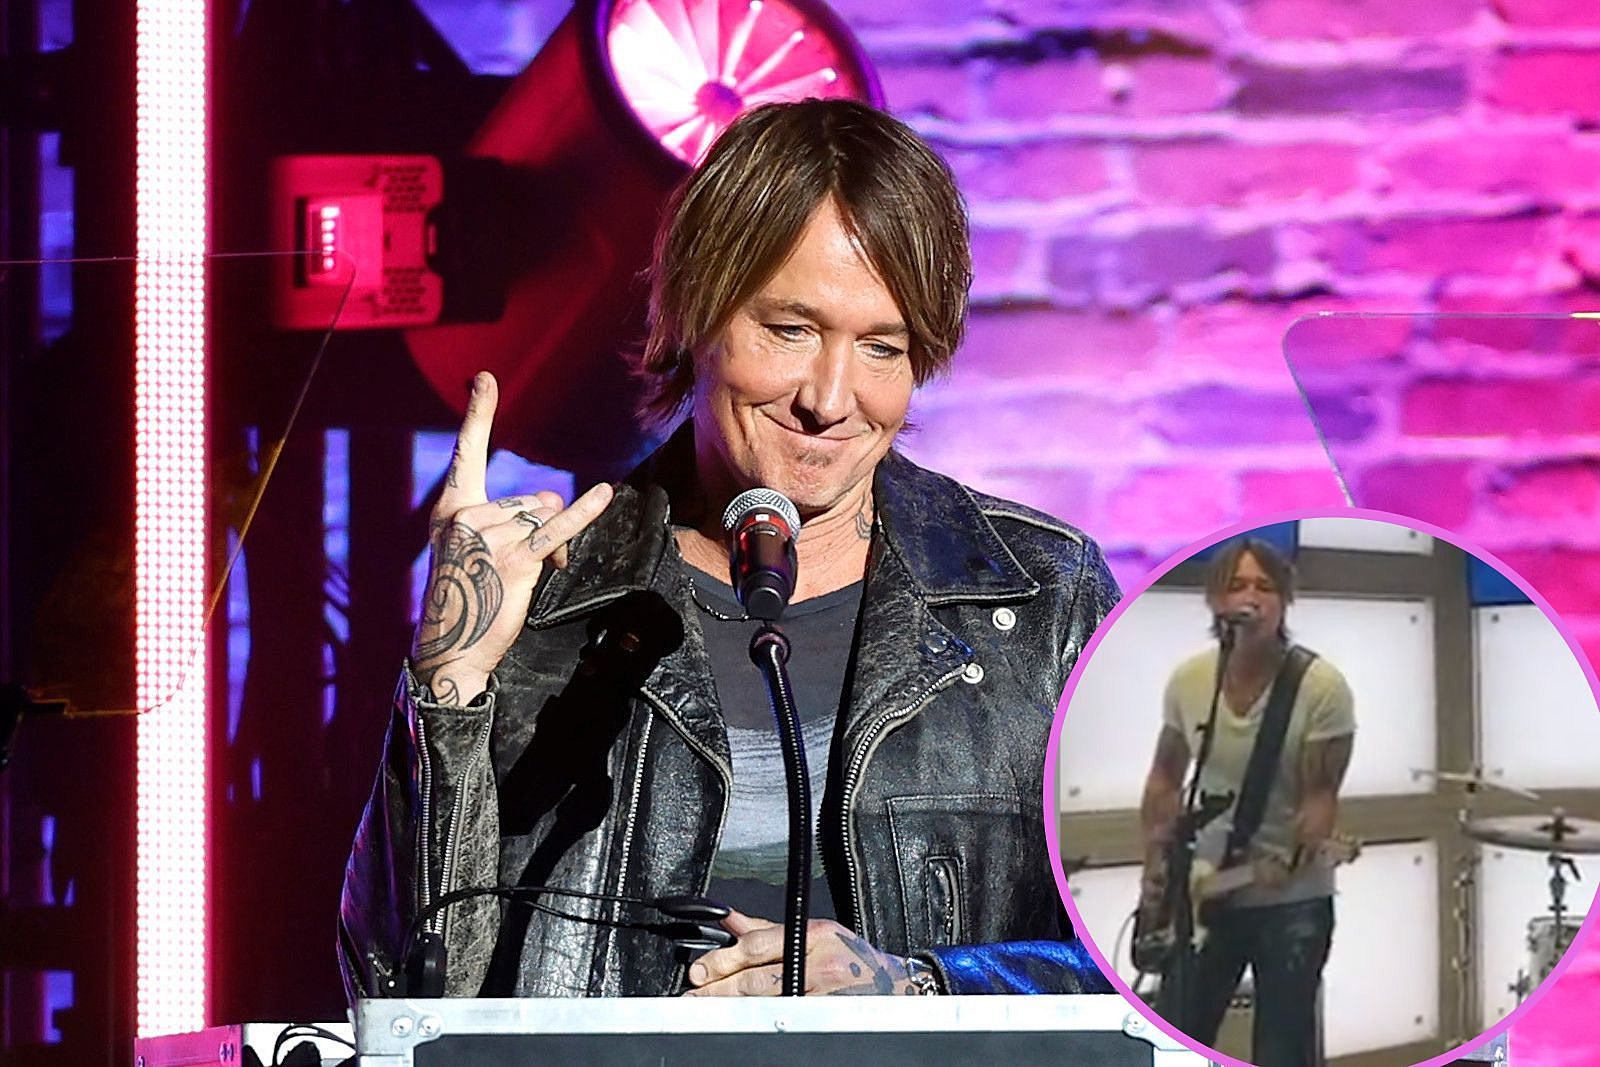 Keith Urban Plays a Surprise Mini-Show at the Nashville Airport
